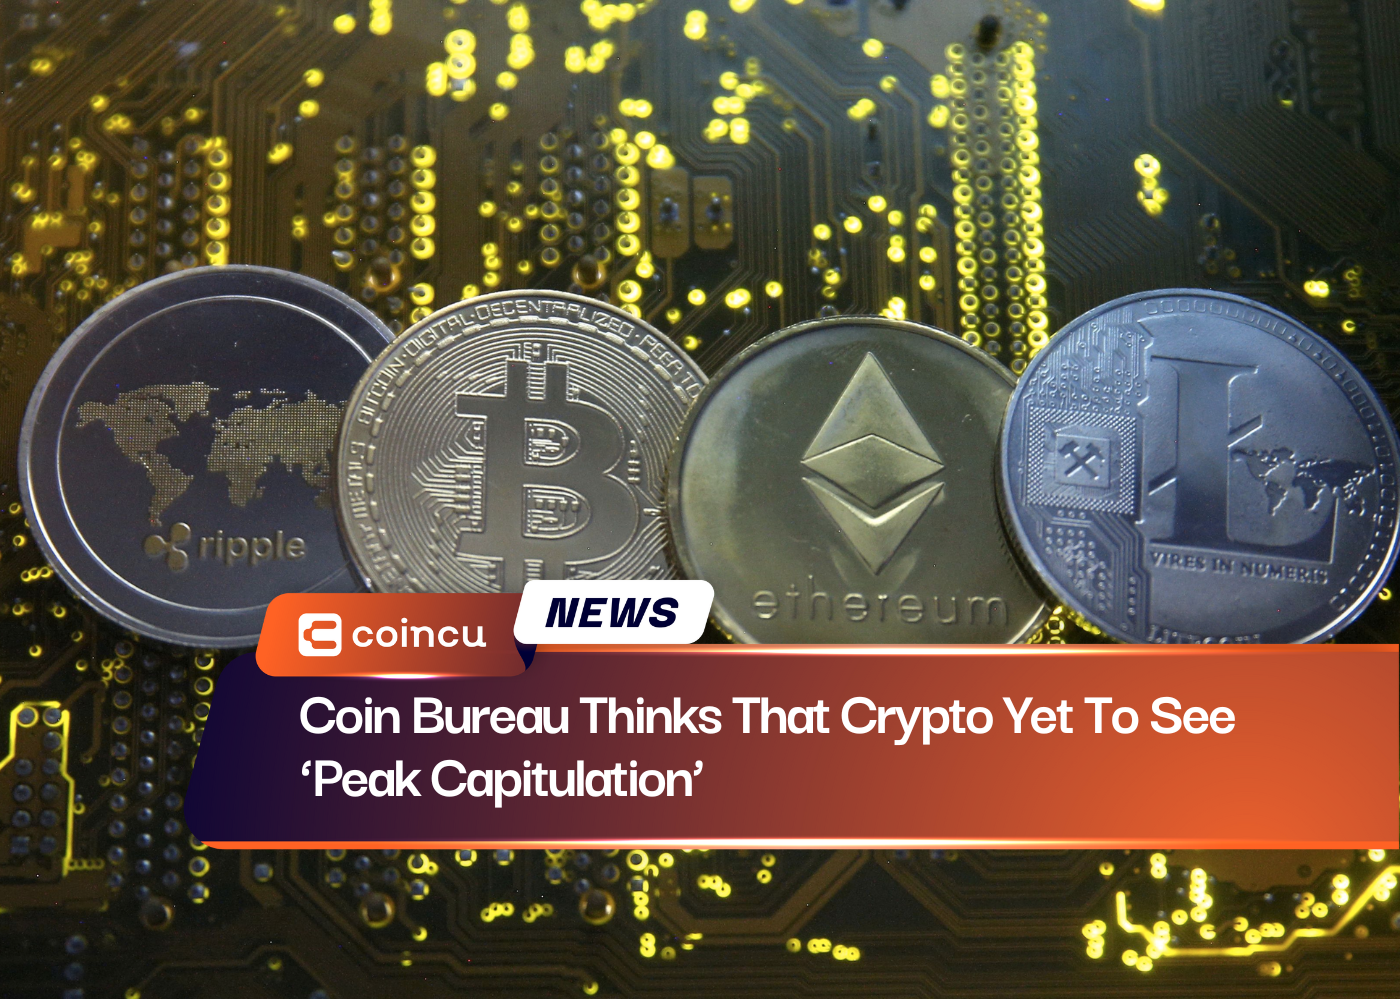 Coin Bureau Thinks That Crypto Yet To See ‘Peak Capitulation’